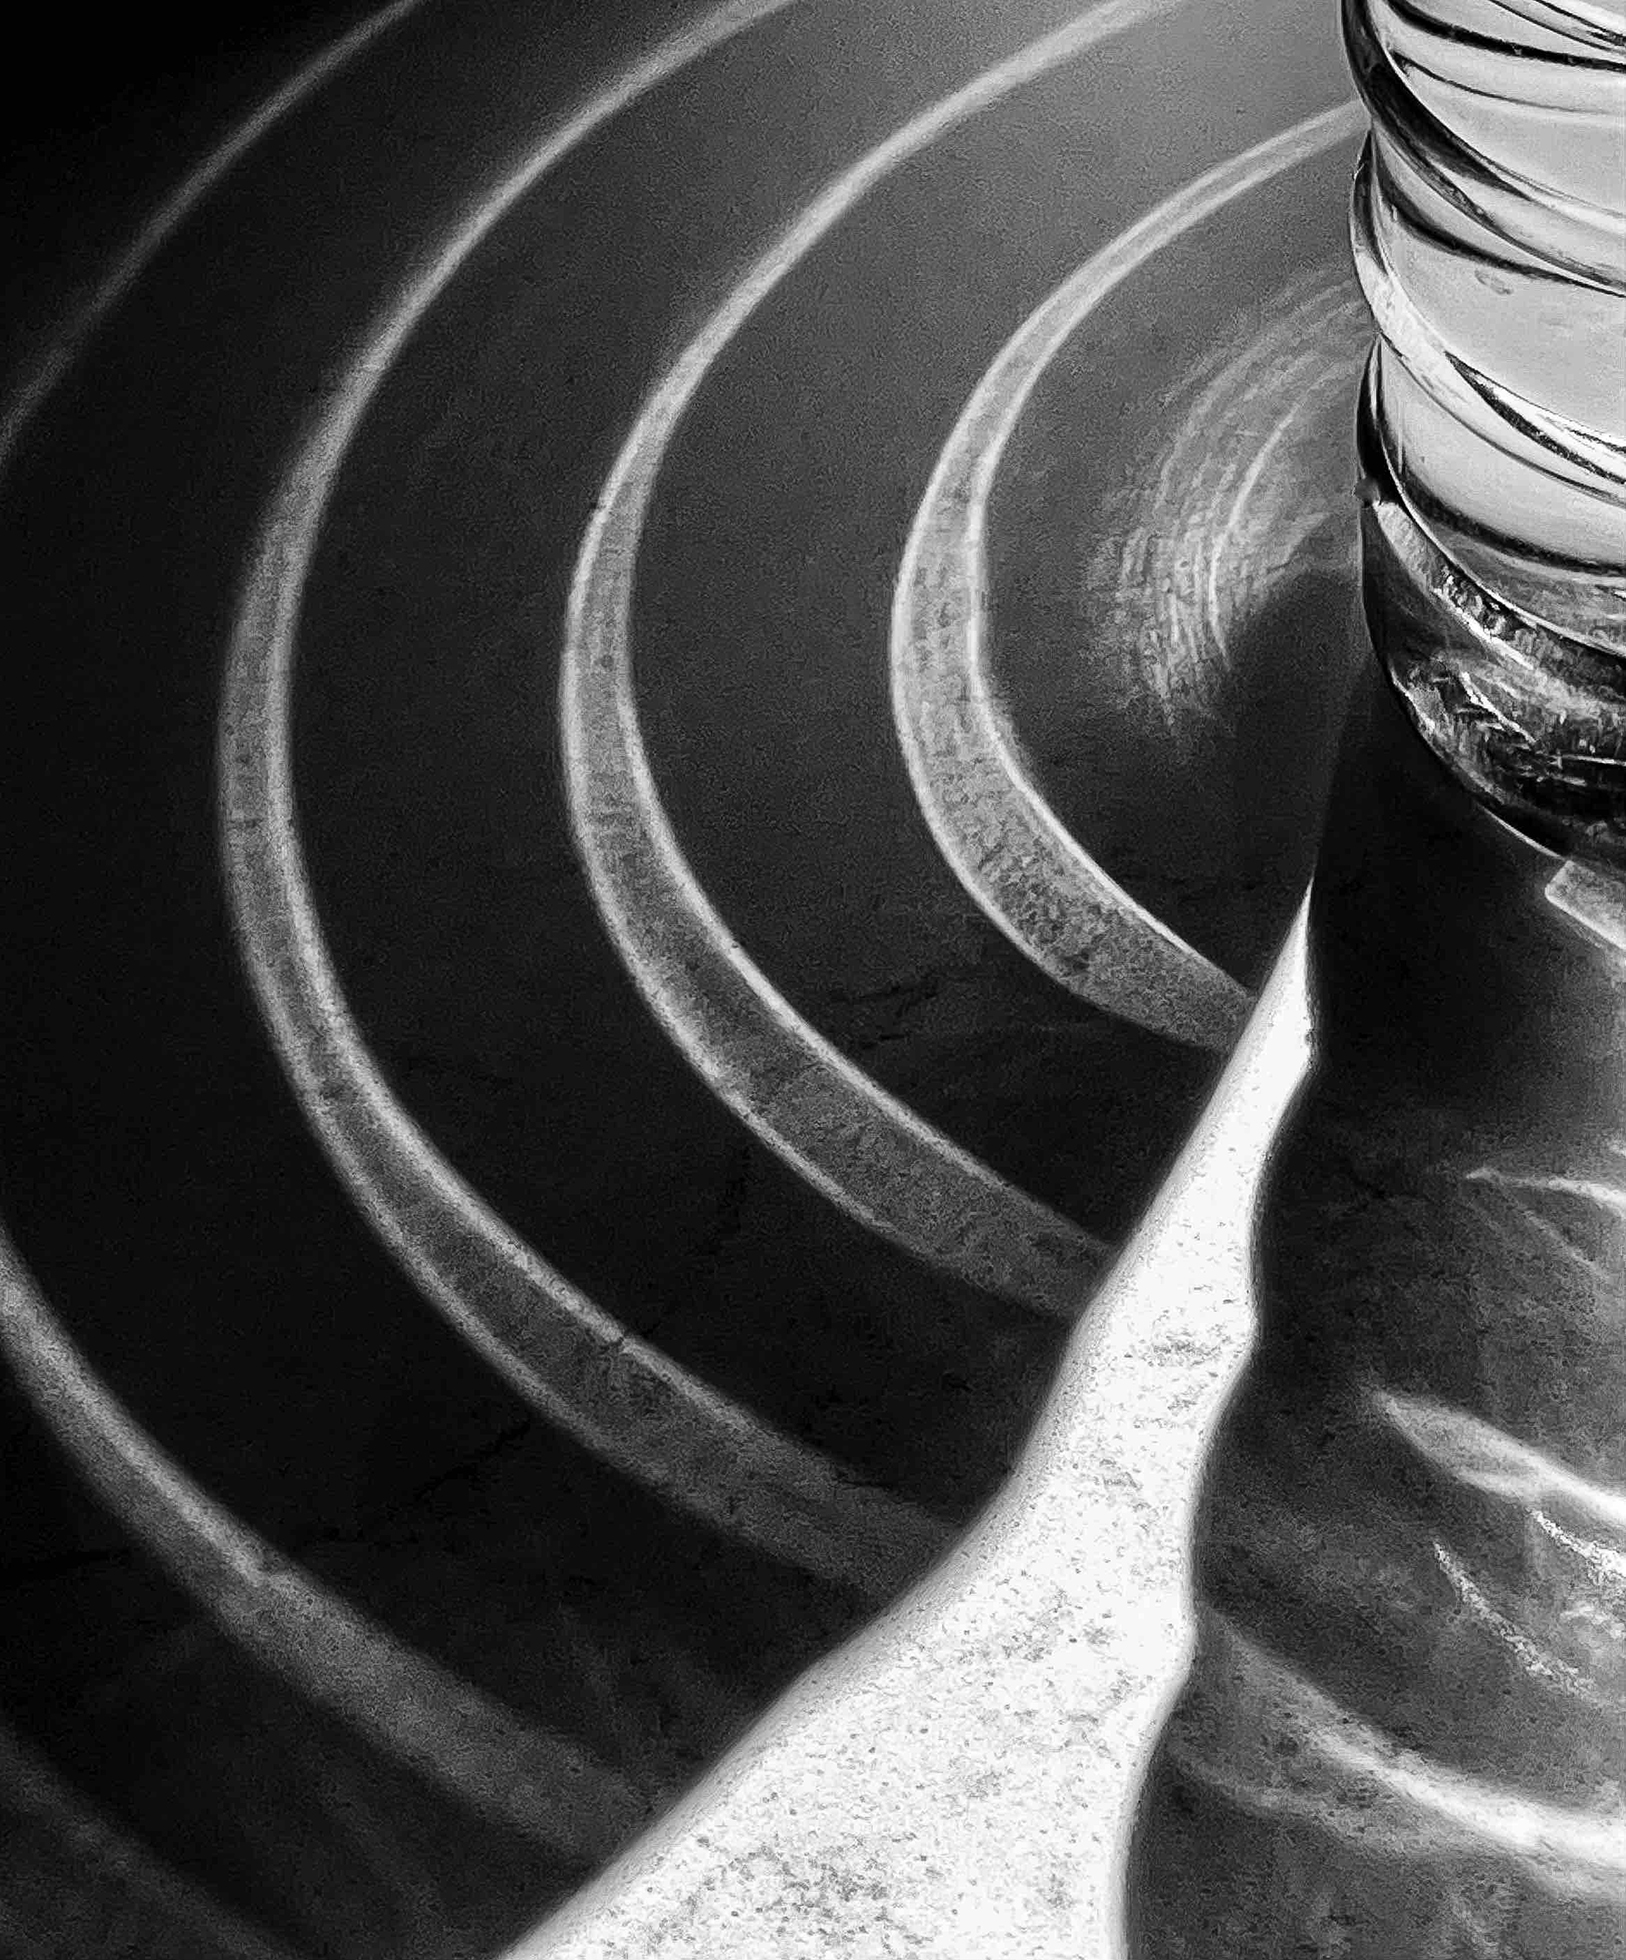 Concentric circles of light reflected on a kitchen counter from the rings on a clear plastic water bottle.